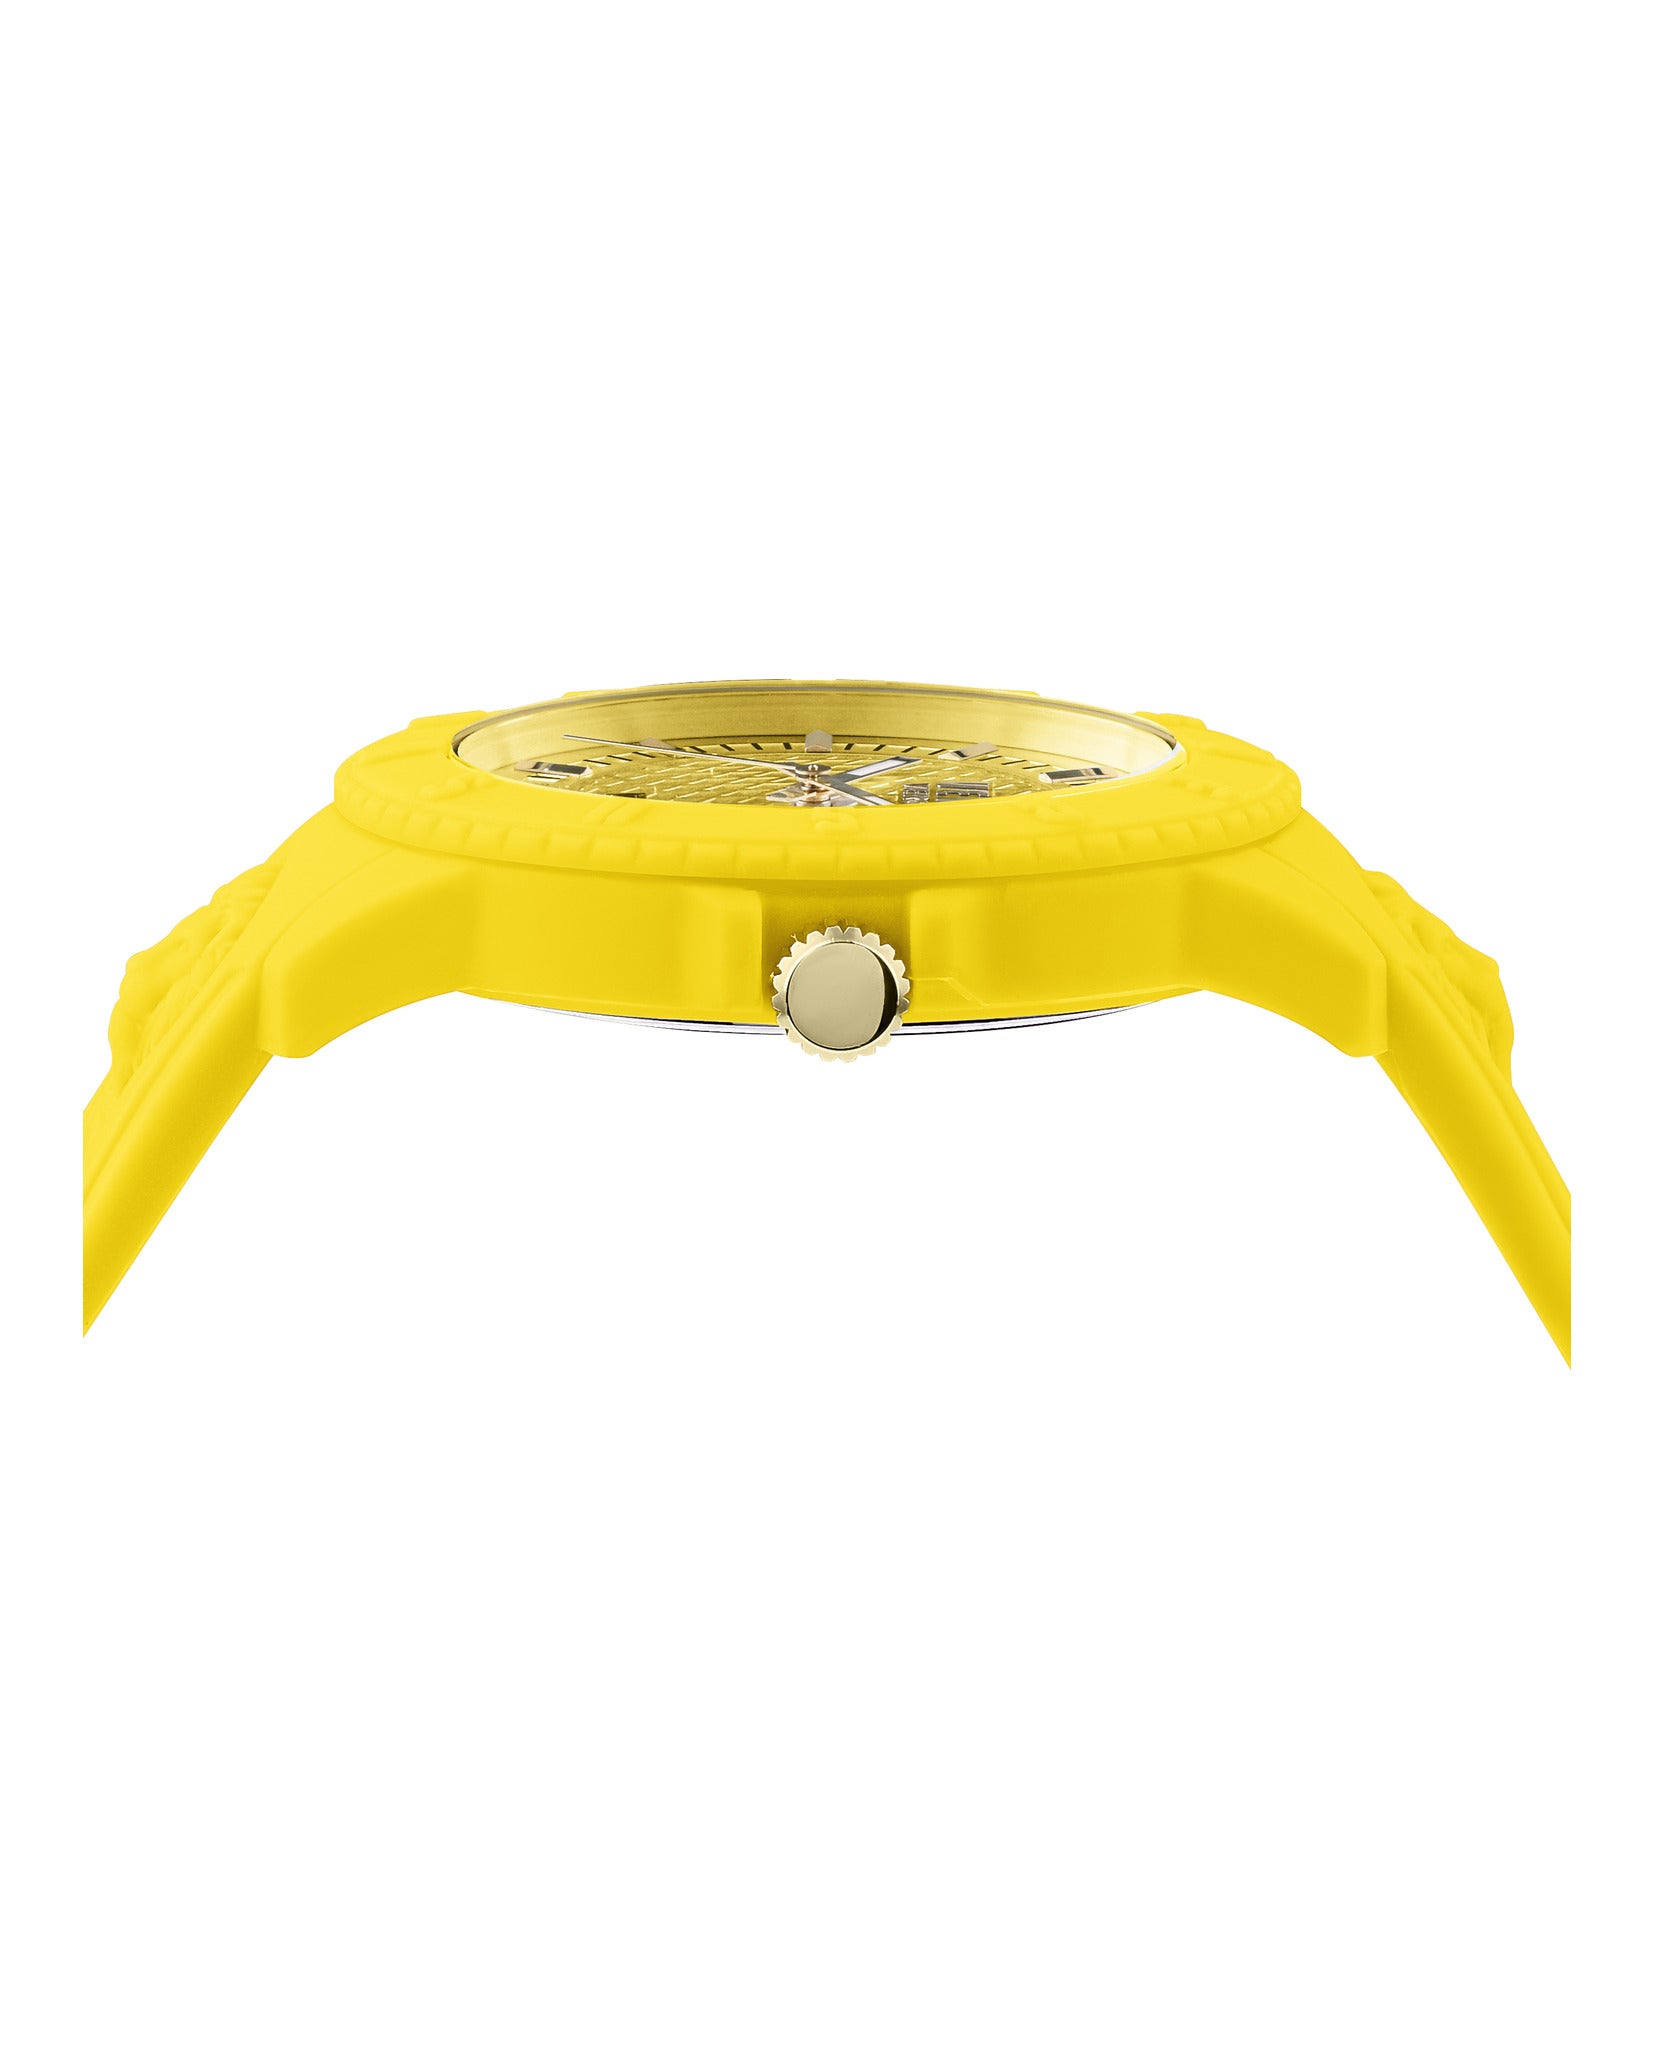 Tokyo Silicone Watch